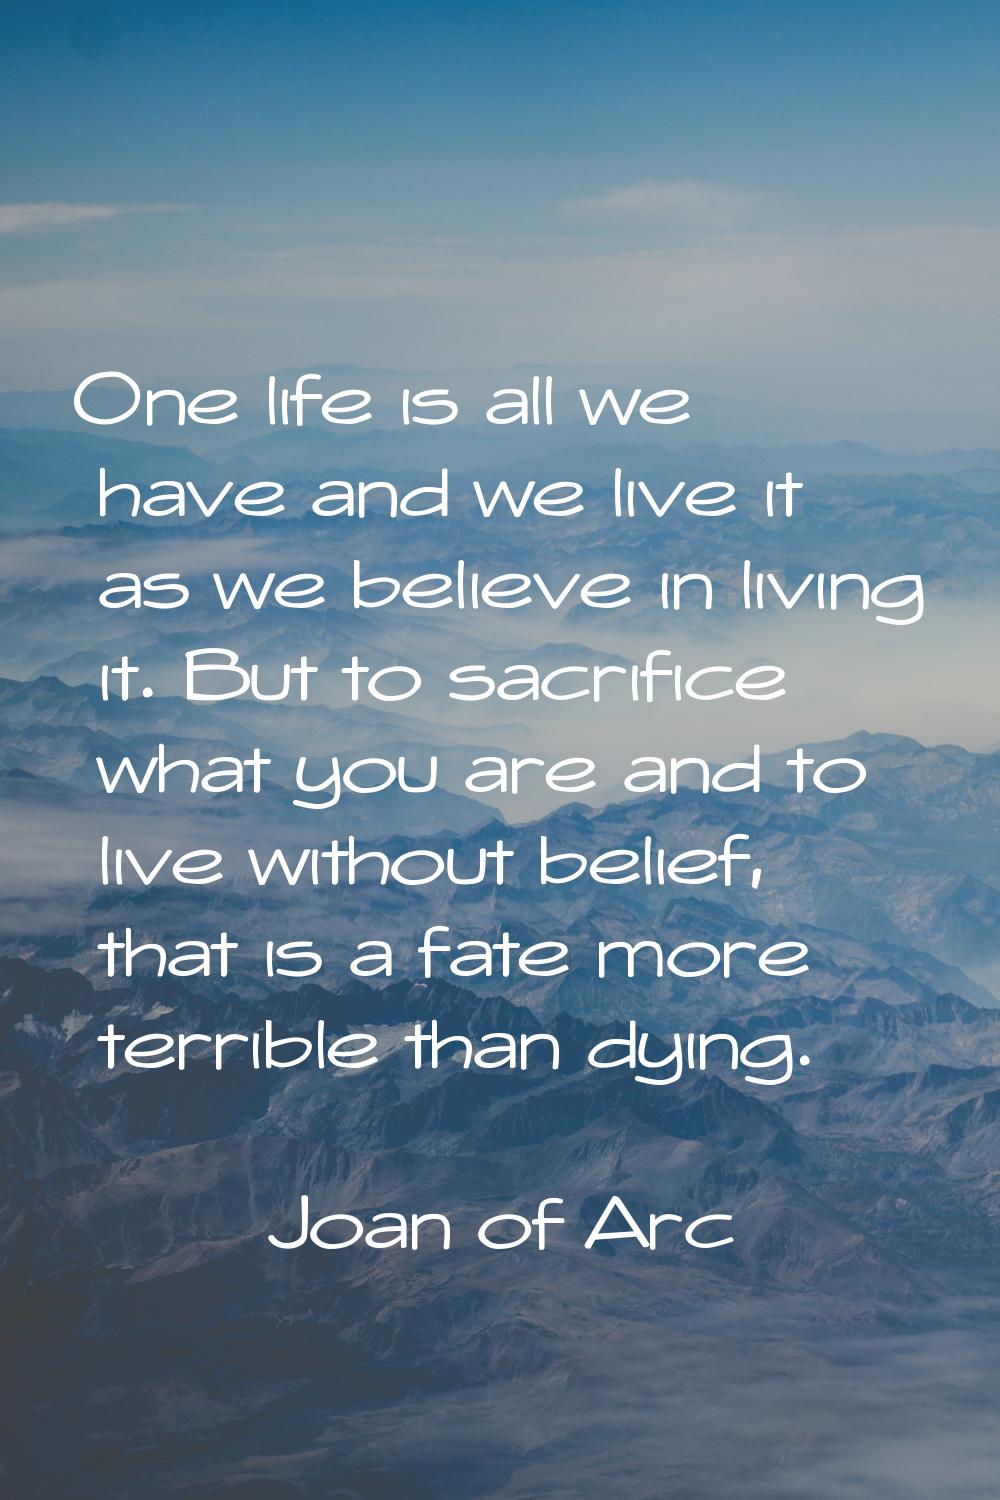 One life is all we have and we live it as we believe in living it. But to sacrifice what you are an